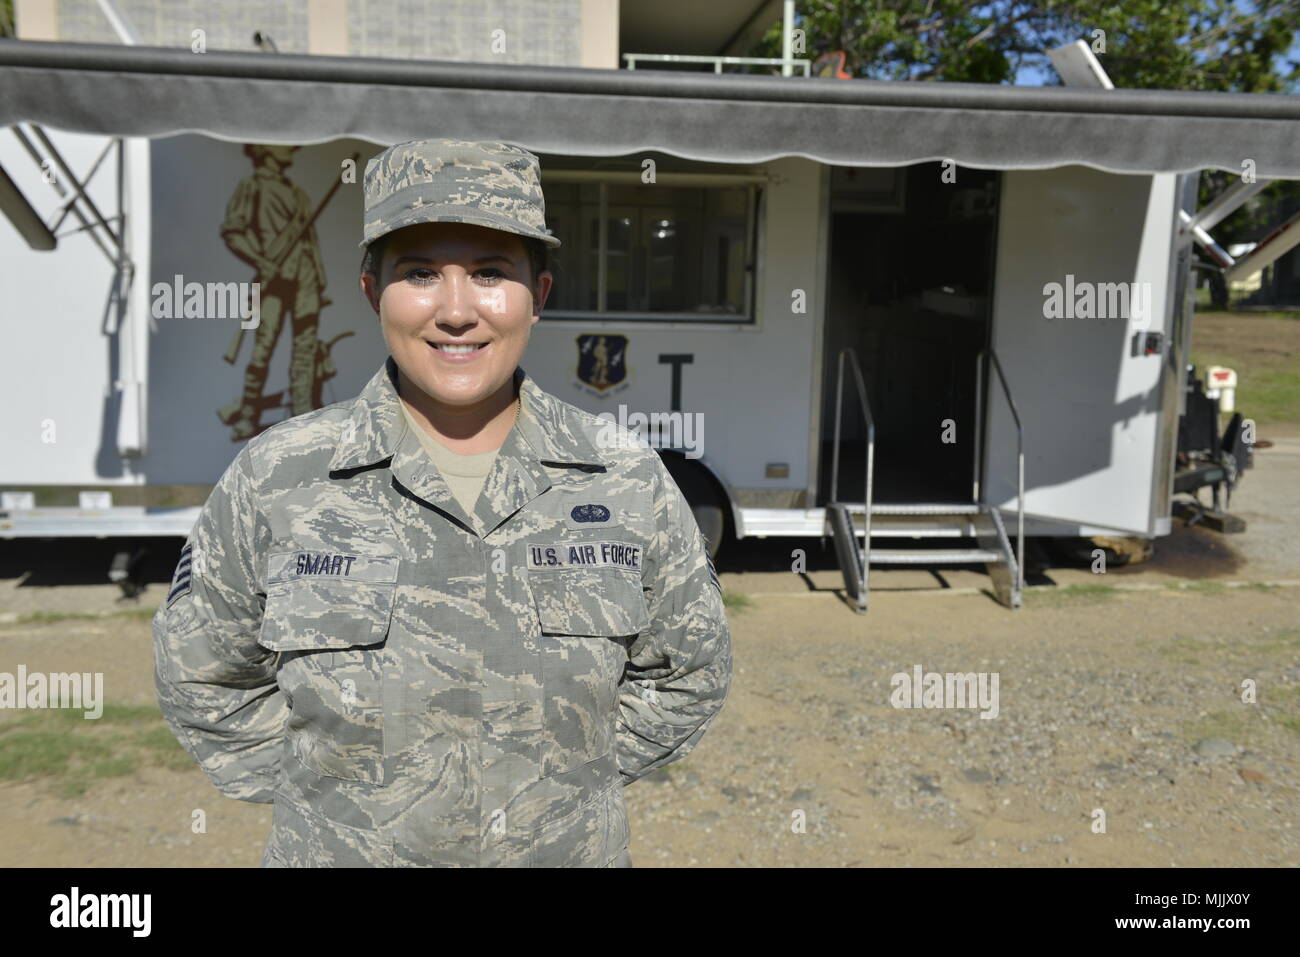 Staff Sgt. Jessica Smart, 148th Fighter Wing Services Non-commissioned Officer, poses for a picture in front of the Disaster Relief Mobile Kitchen Trailer stationed at Camp Santiago, Puerto Rico on Dec. 2, 2017.  SSgt Smart, a native of Duluth, Minn., and around 10 other airmen from the Minnesota National Guard’s 148th Fighter Wing and 133rd Airlift Wing have deployed along with the DRMKT to provide support to military and civilian disaster relief workers in the Salinas area. Stock Photo